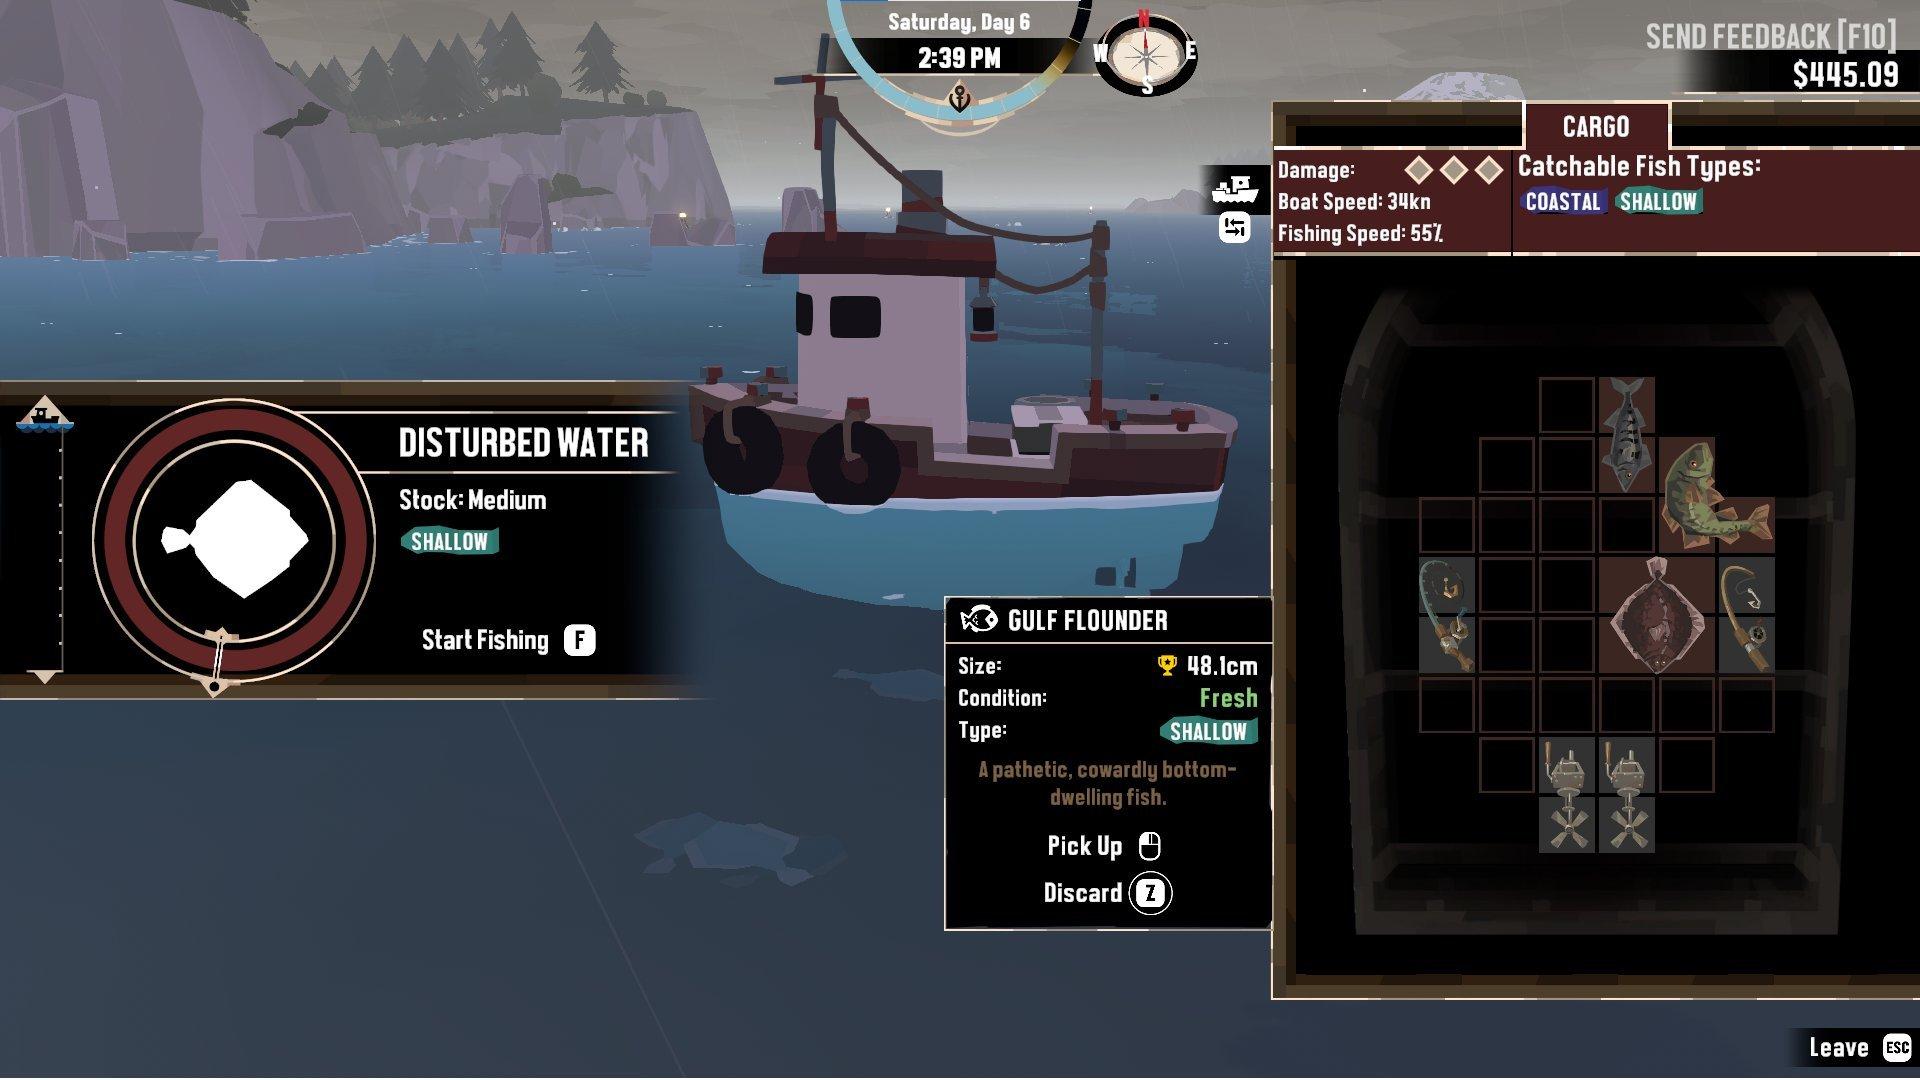 Lovecraftian Fishing Game 'DREDGE' Out Now for PC, Consoles